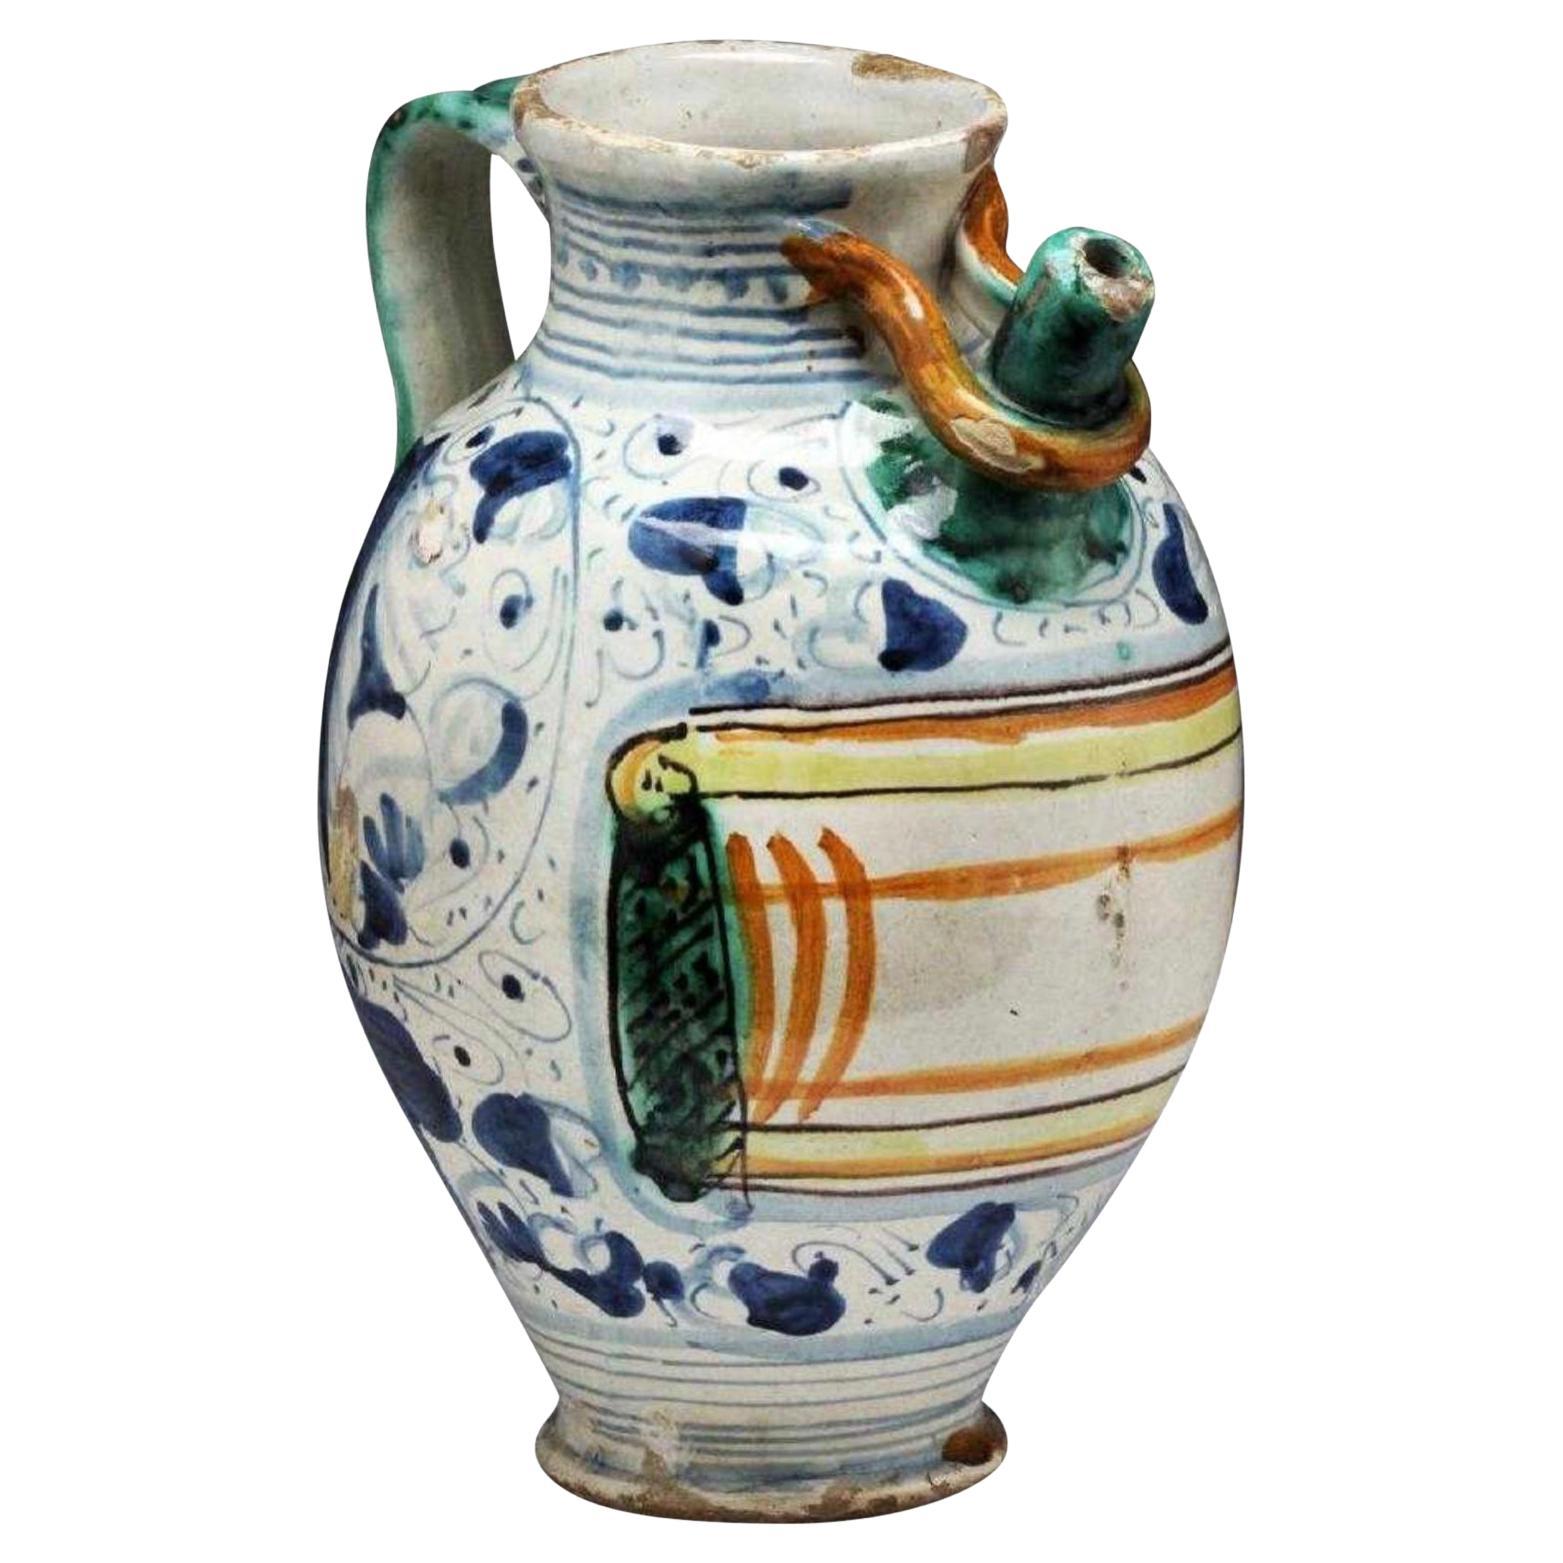 Italian 18th C. Majolica Wet Drug or Syrup Jar For Sale